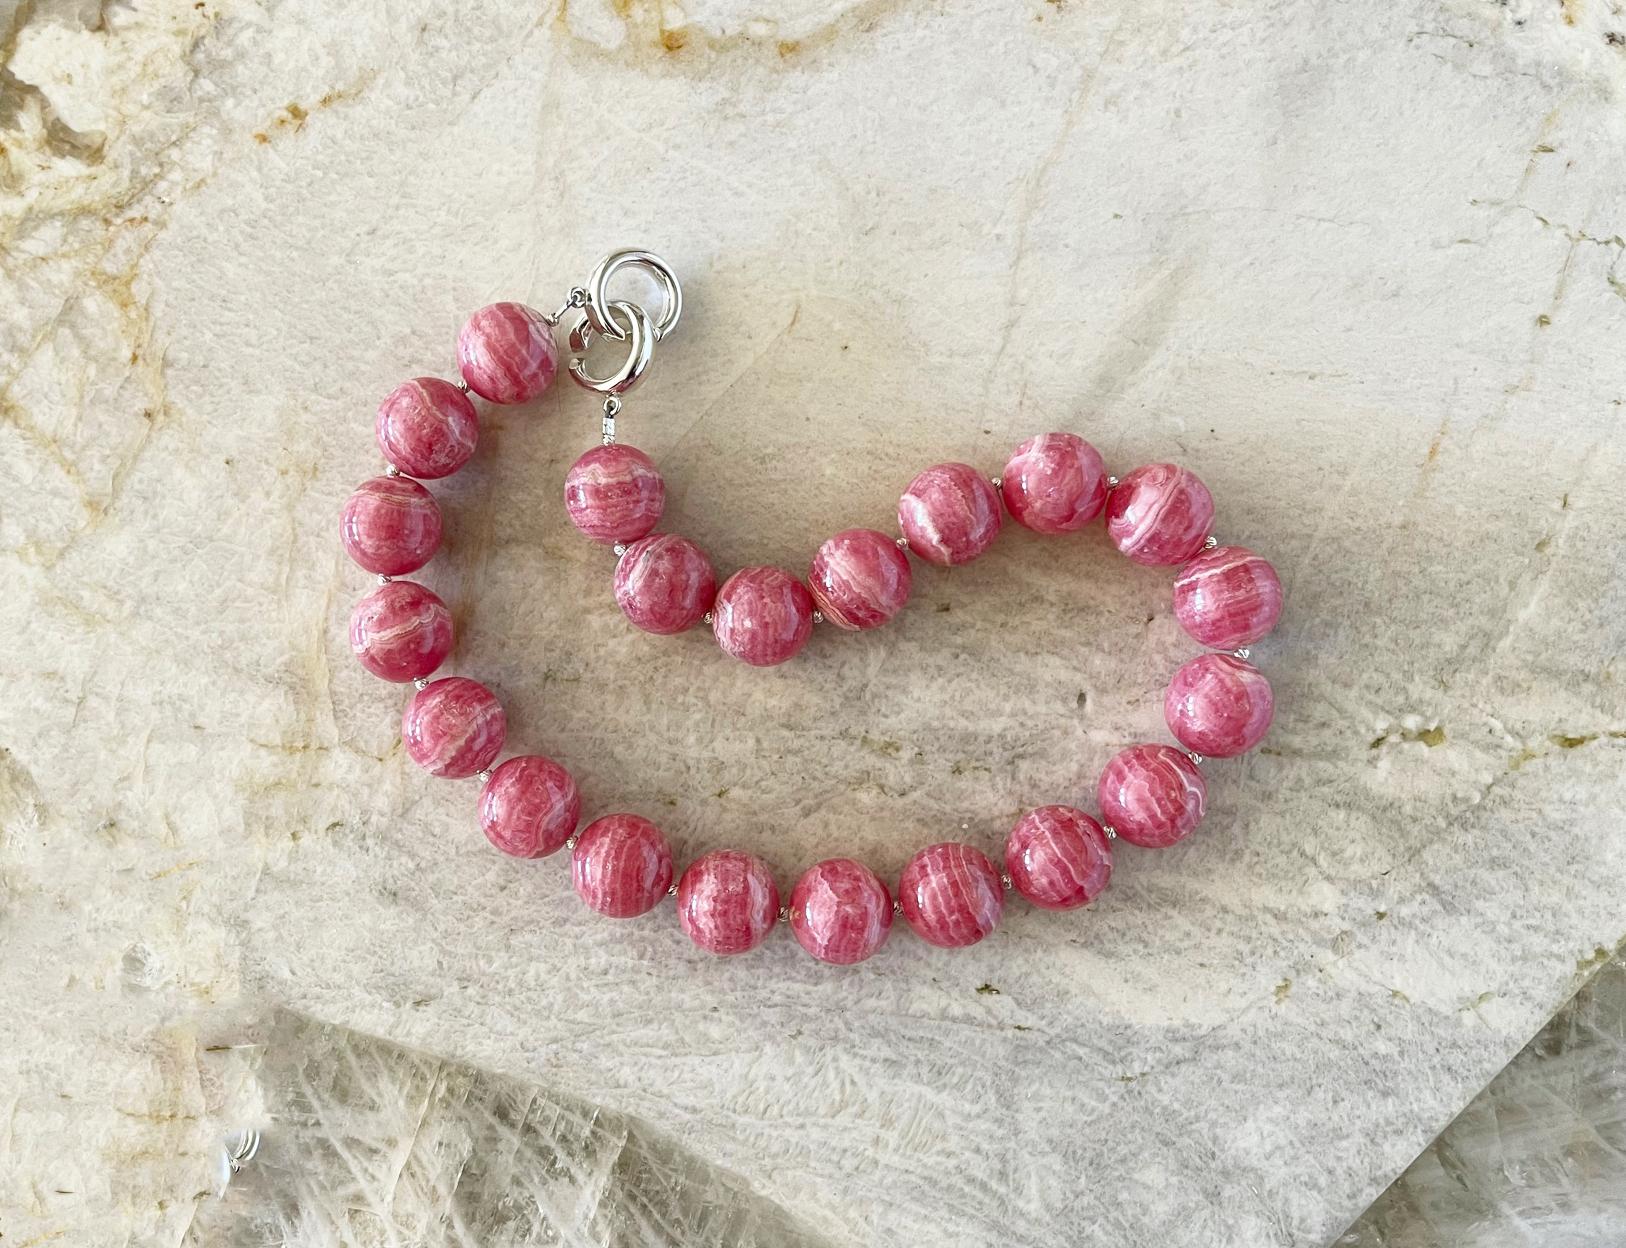 This is a truly spectacular top quality natural rhodochrosite necklace comprised of 19mm round natural rhodochrosite beads, sterling silver accent beads, and an elegant interlocking clasp. We love this clasp style. It is so easy to fasten on your